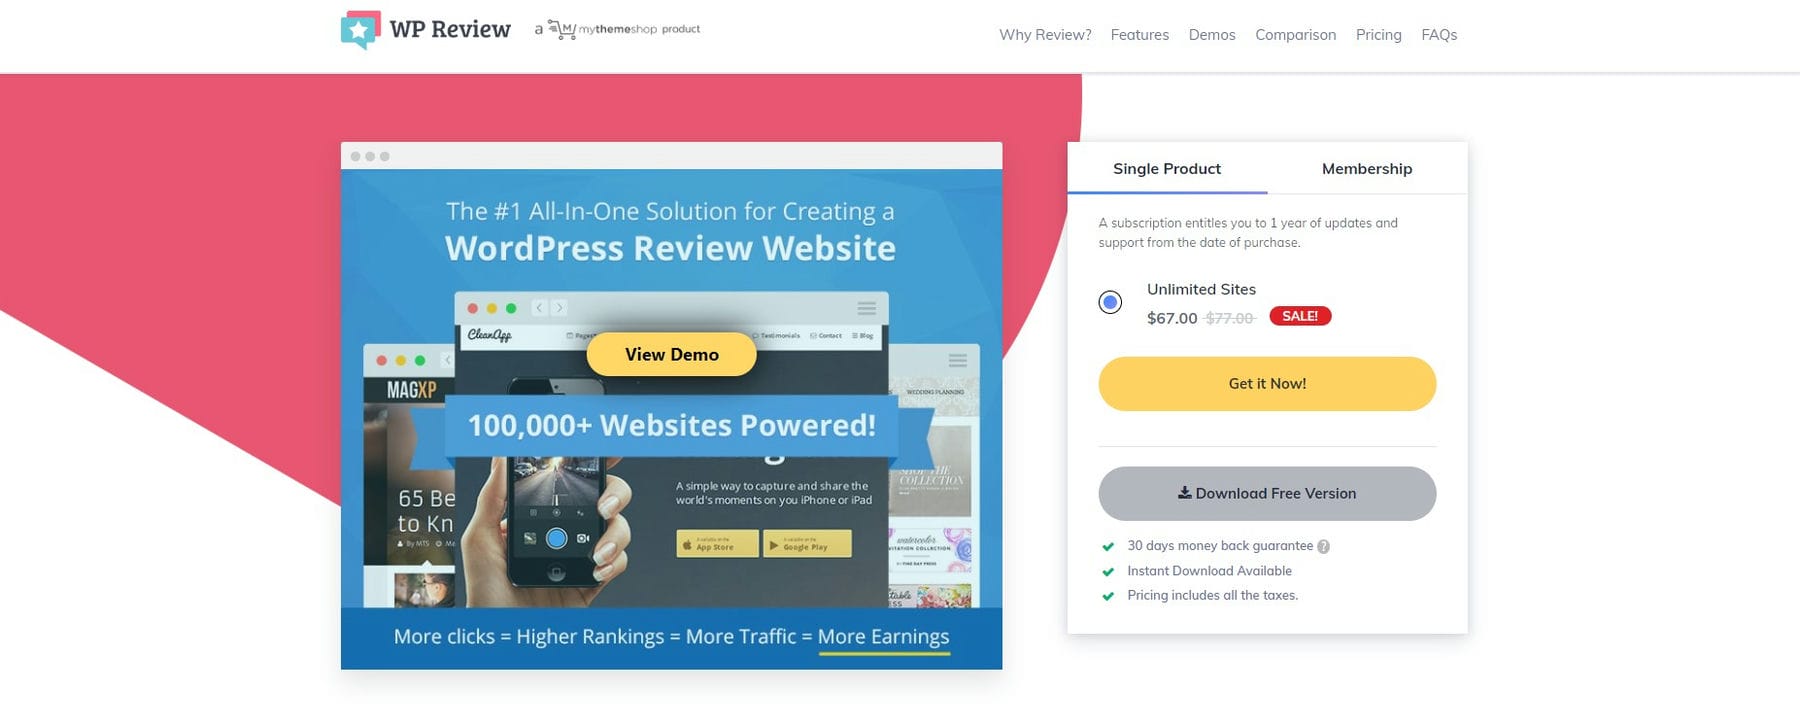 WP Review Product Page Feb 2023